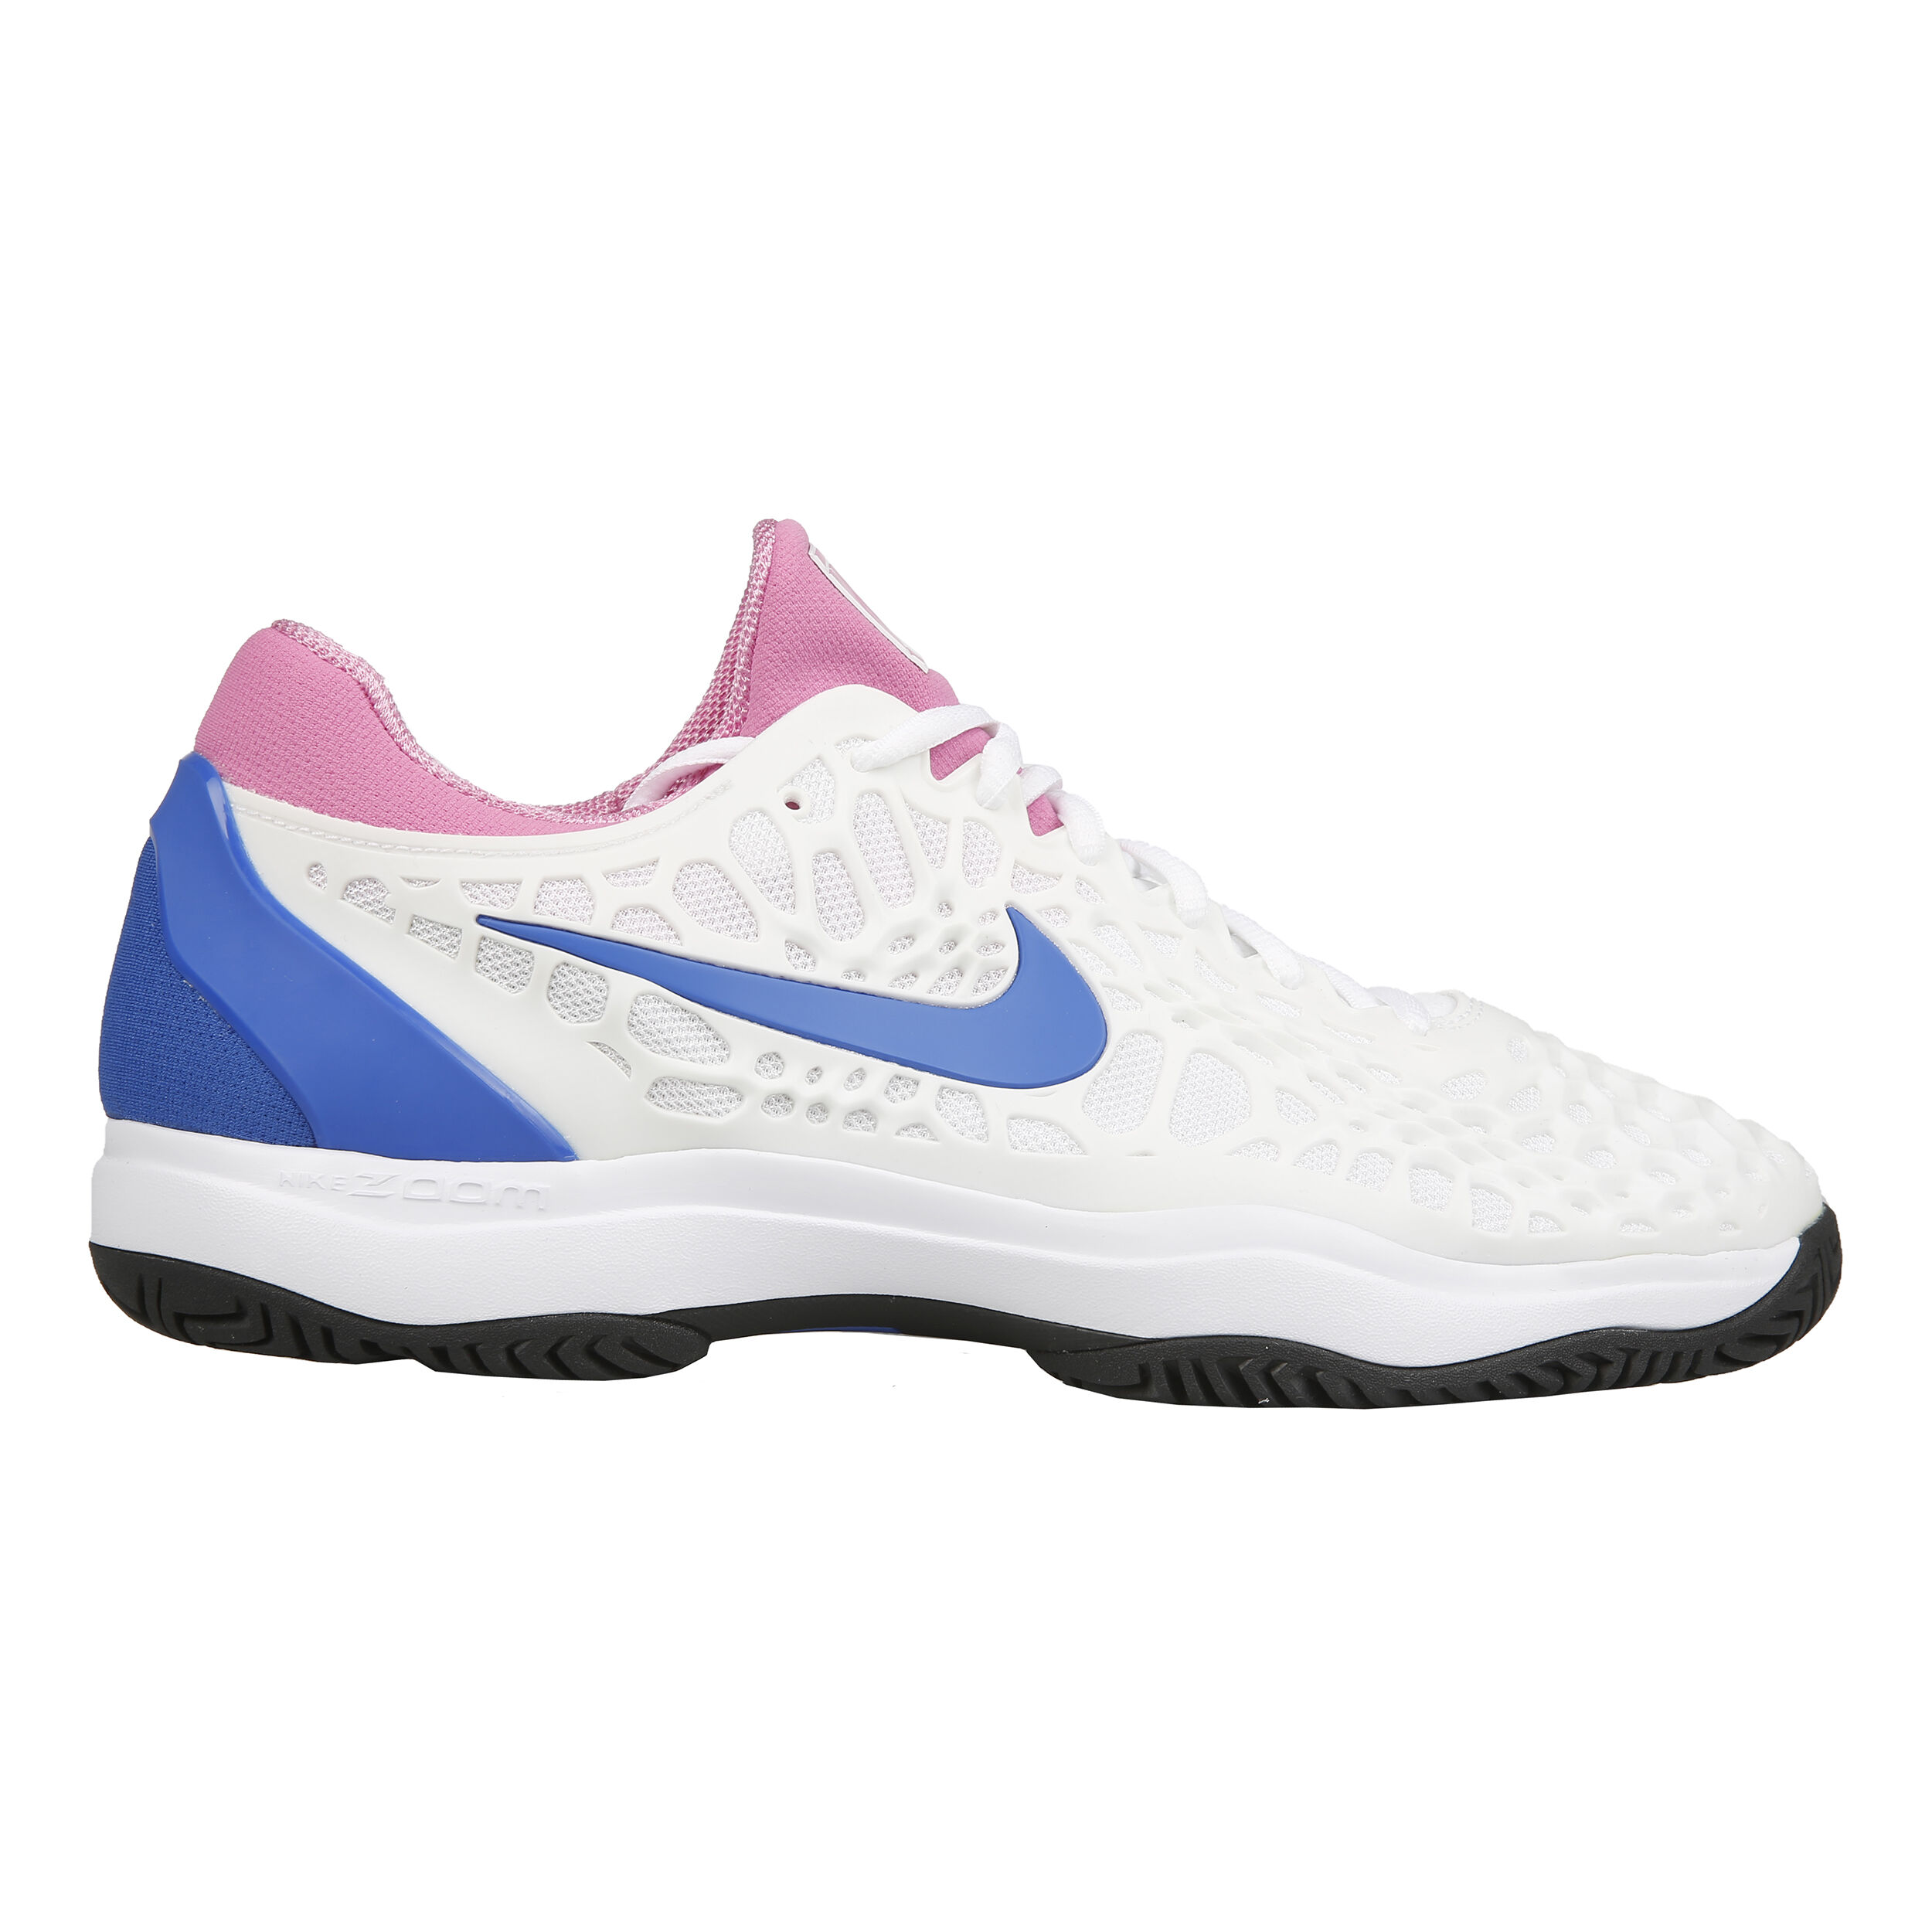 Nike Air Zoom Cage 3 HC Chaussures Toutes Surfaces Hommes - Blanc ...